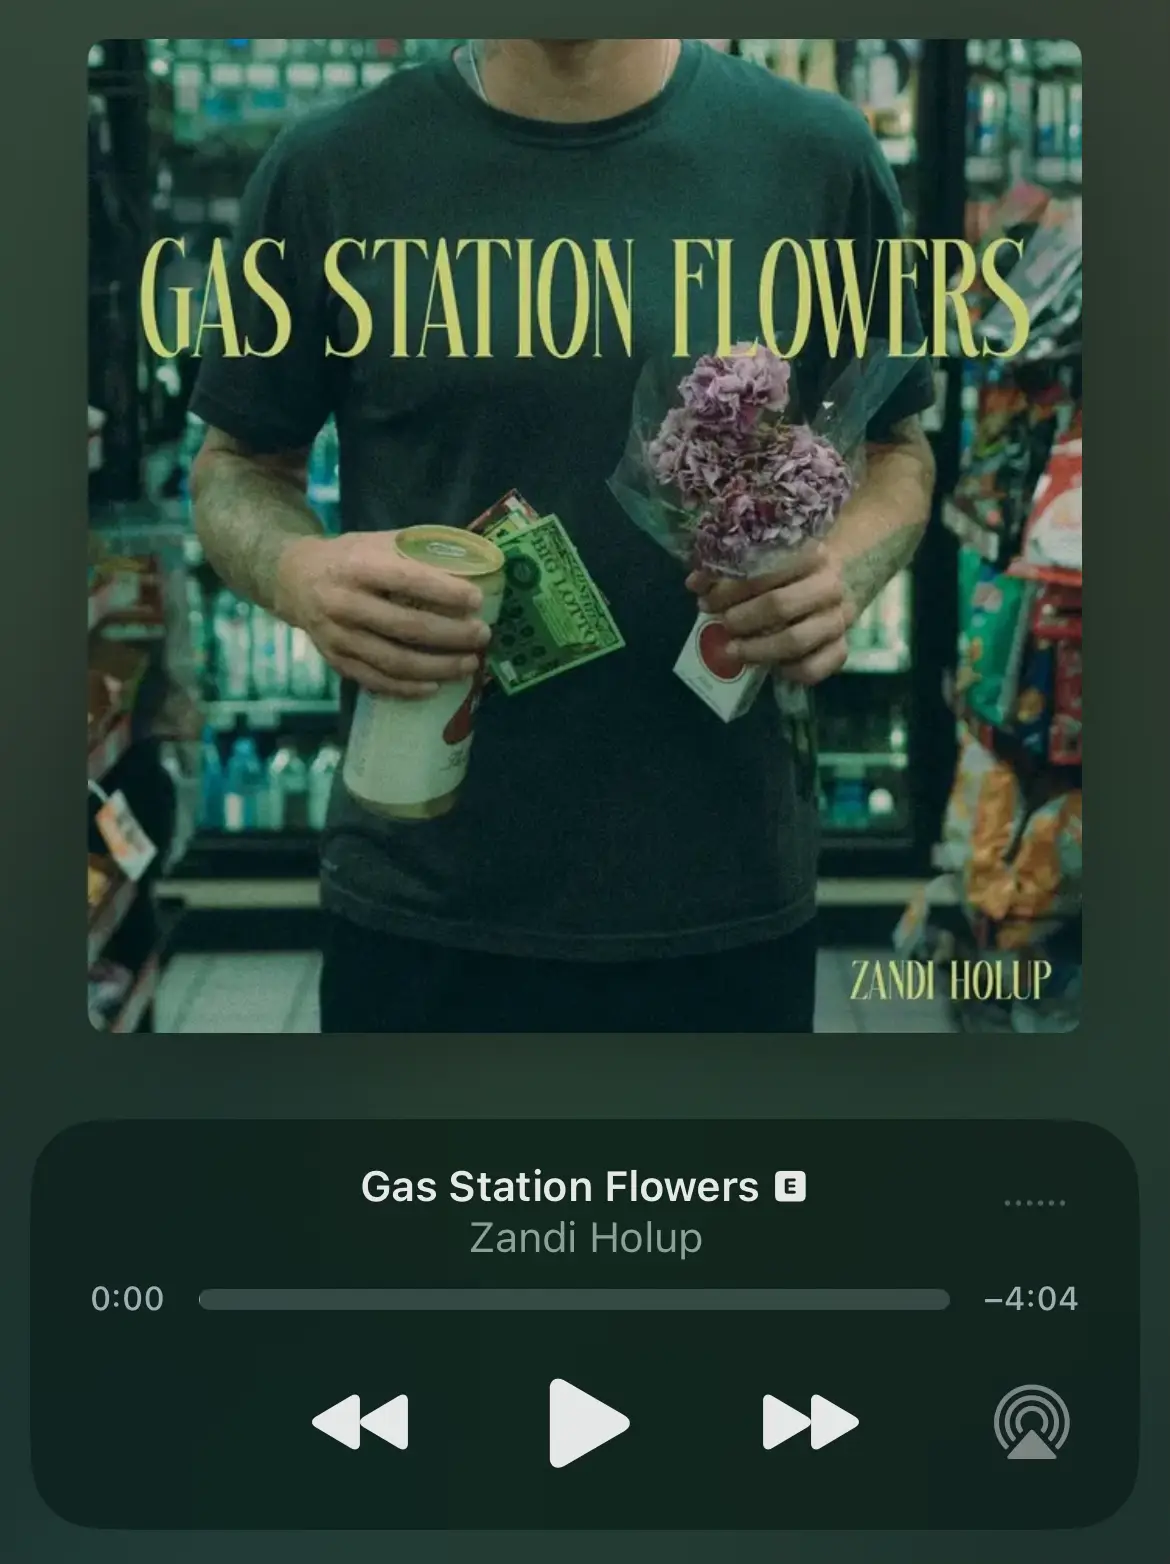  A man holding a can of gas and a flower.